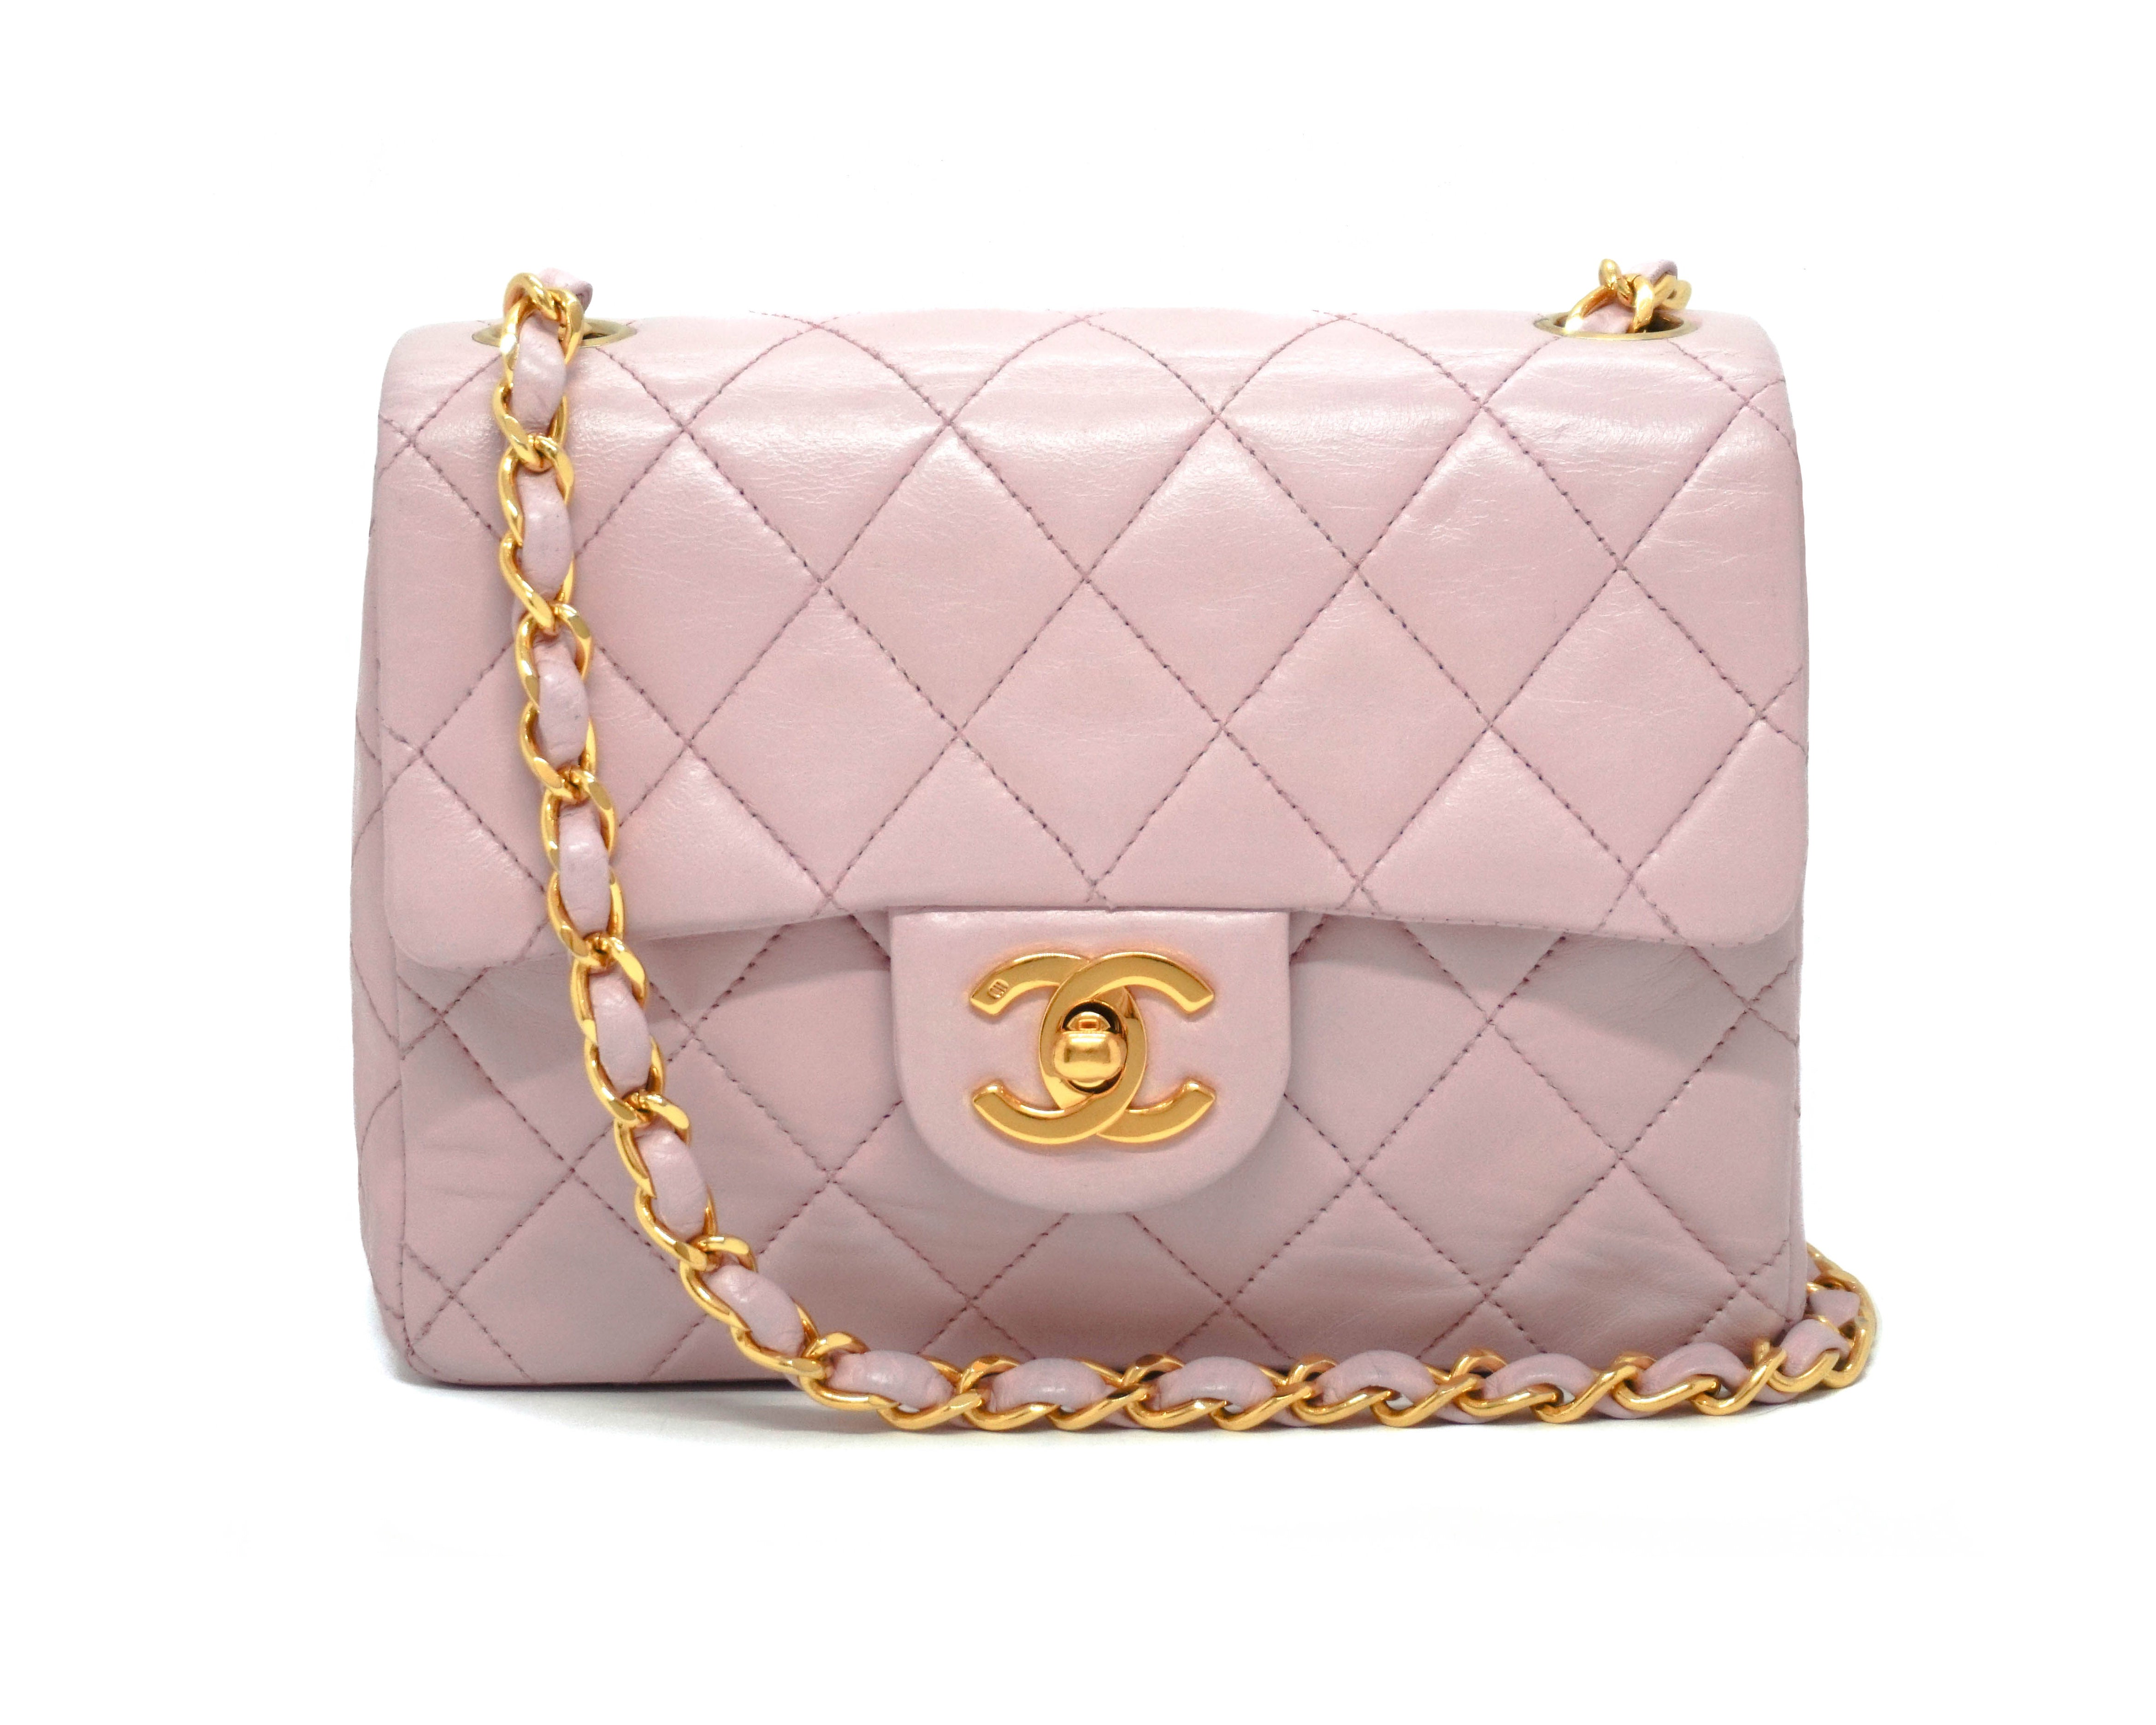 Chanel Pink Lambskin 2.55 Mini Flap Bag – Classic Coco Authentic Vintage